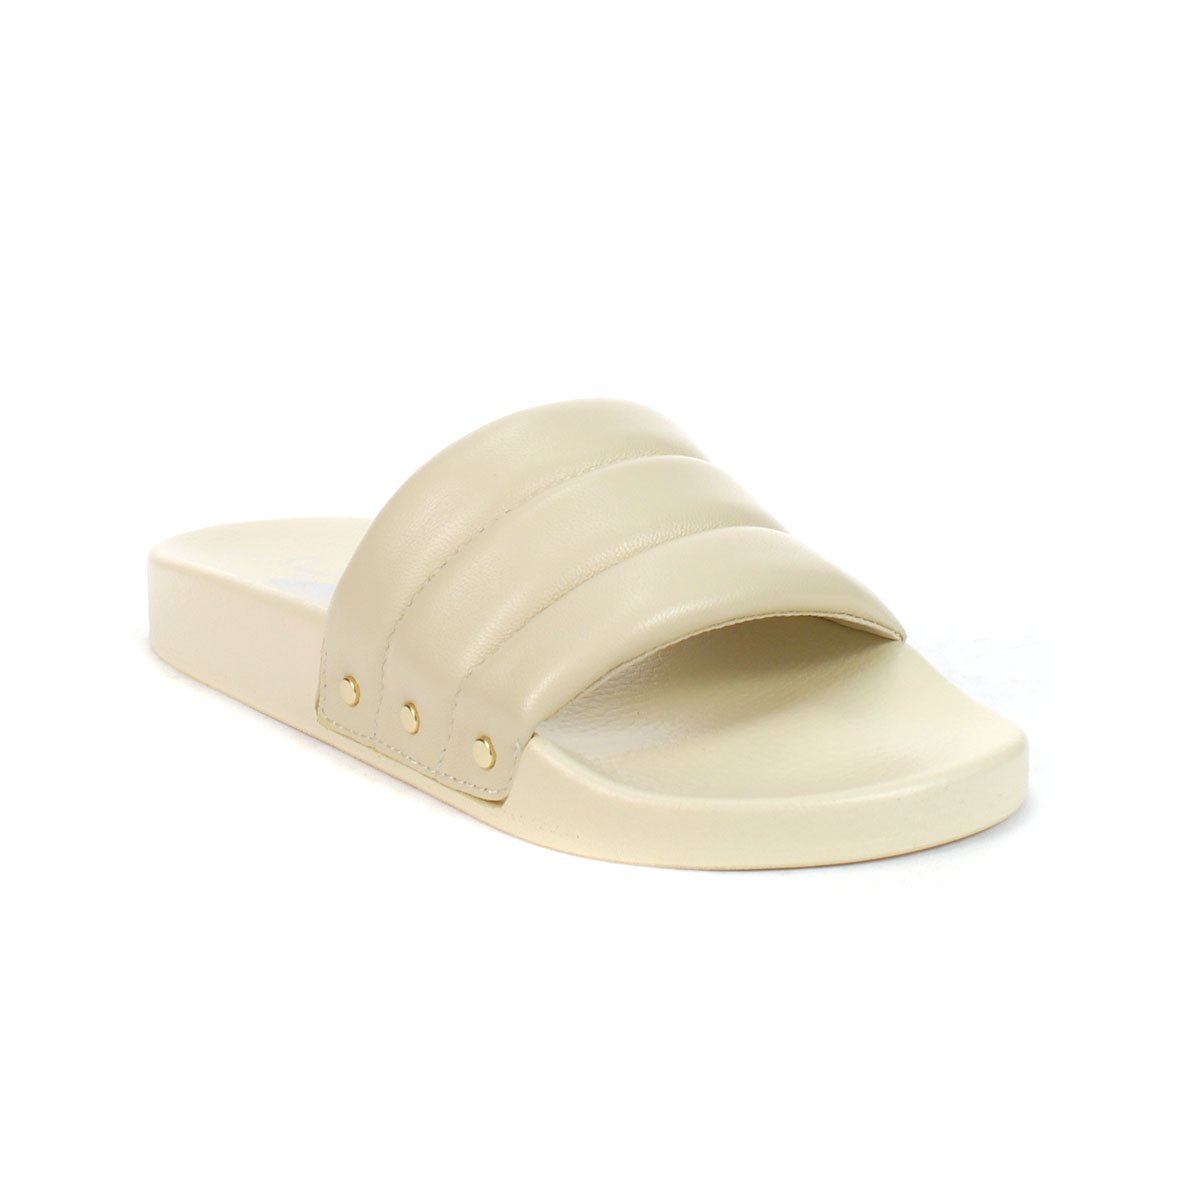 Dr. Scholl's Pisces Chill White Cap Leather Slides - WOOKI.COM